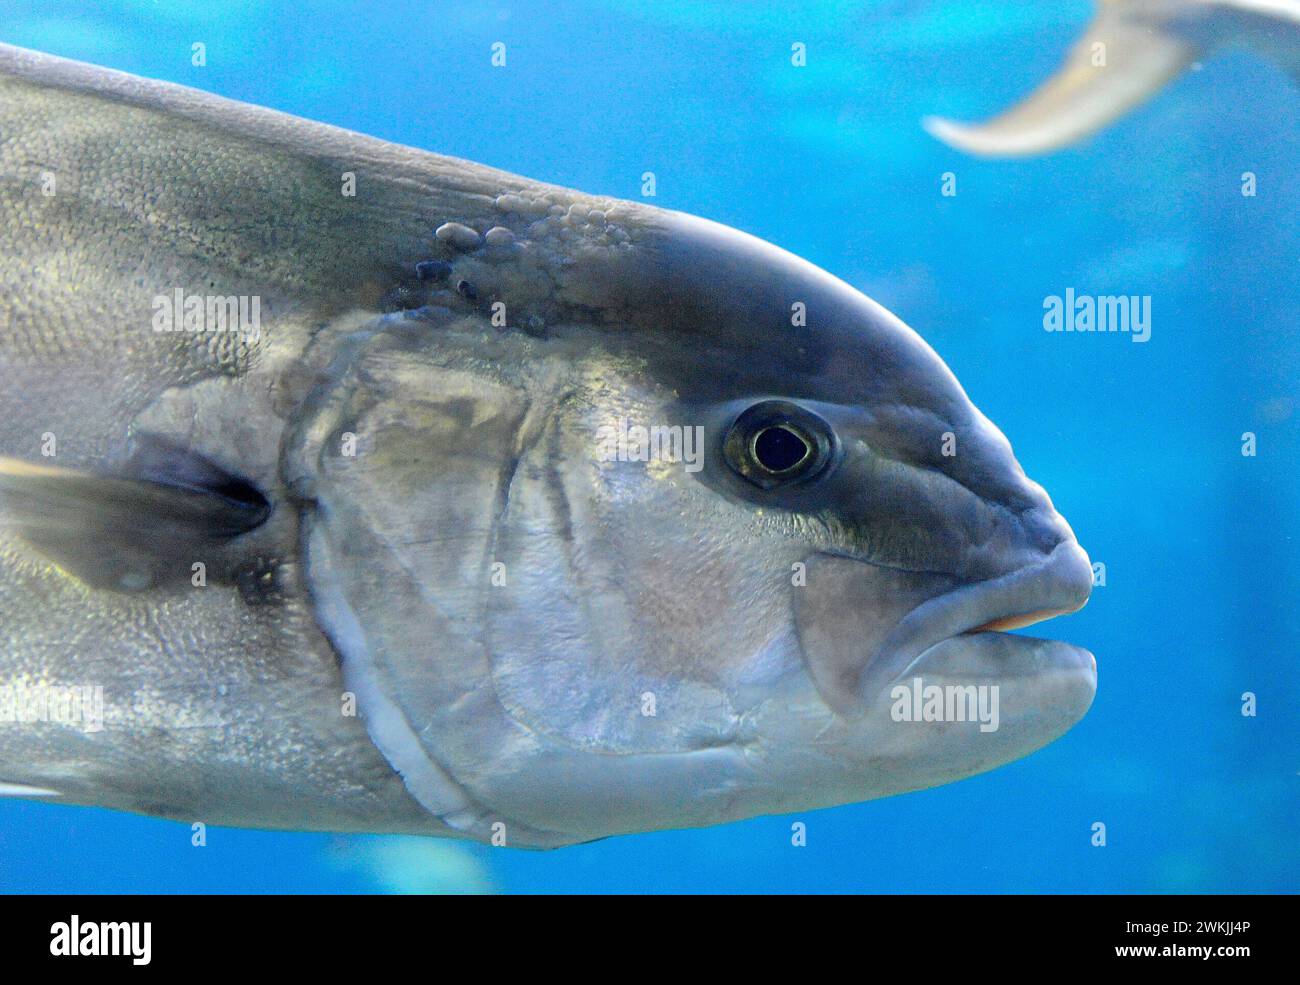 Greater amberjack (Seriola dumerili) is a marine fish native to tropical and subtropical waters of the world. Head detail. Stock Photo